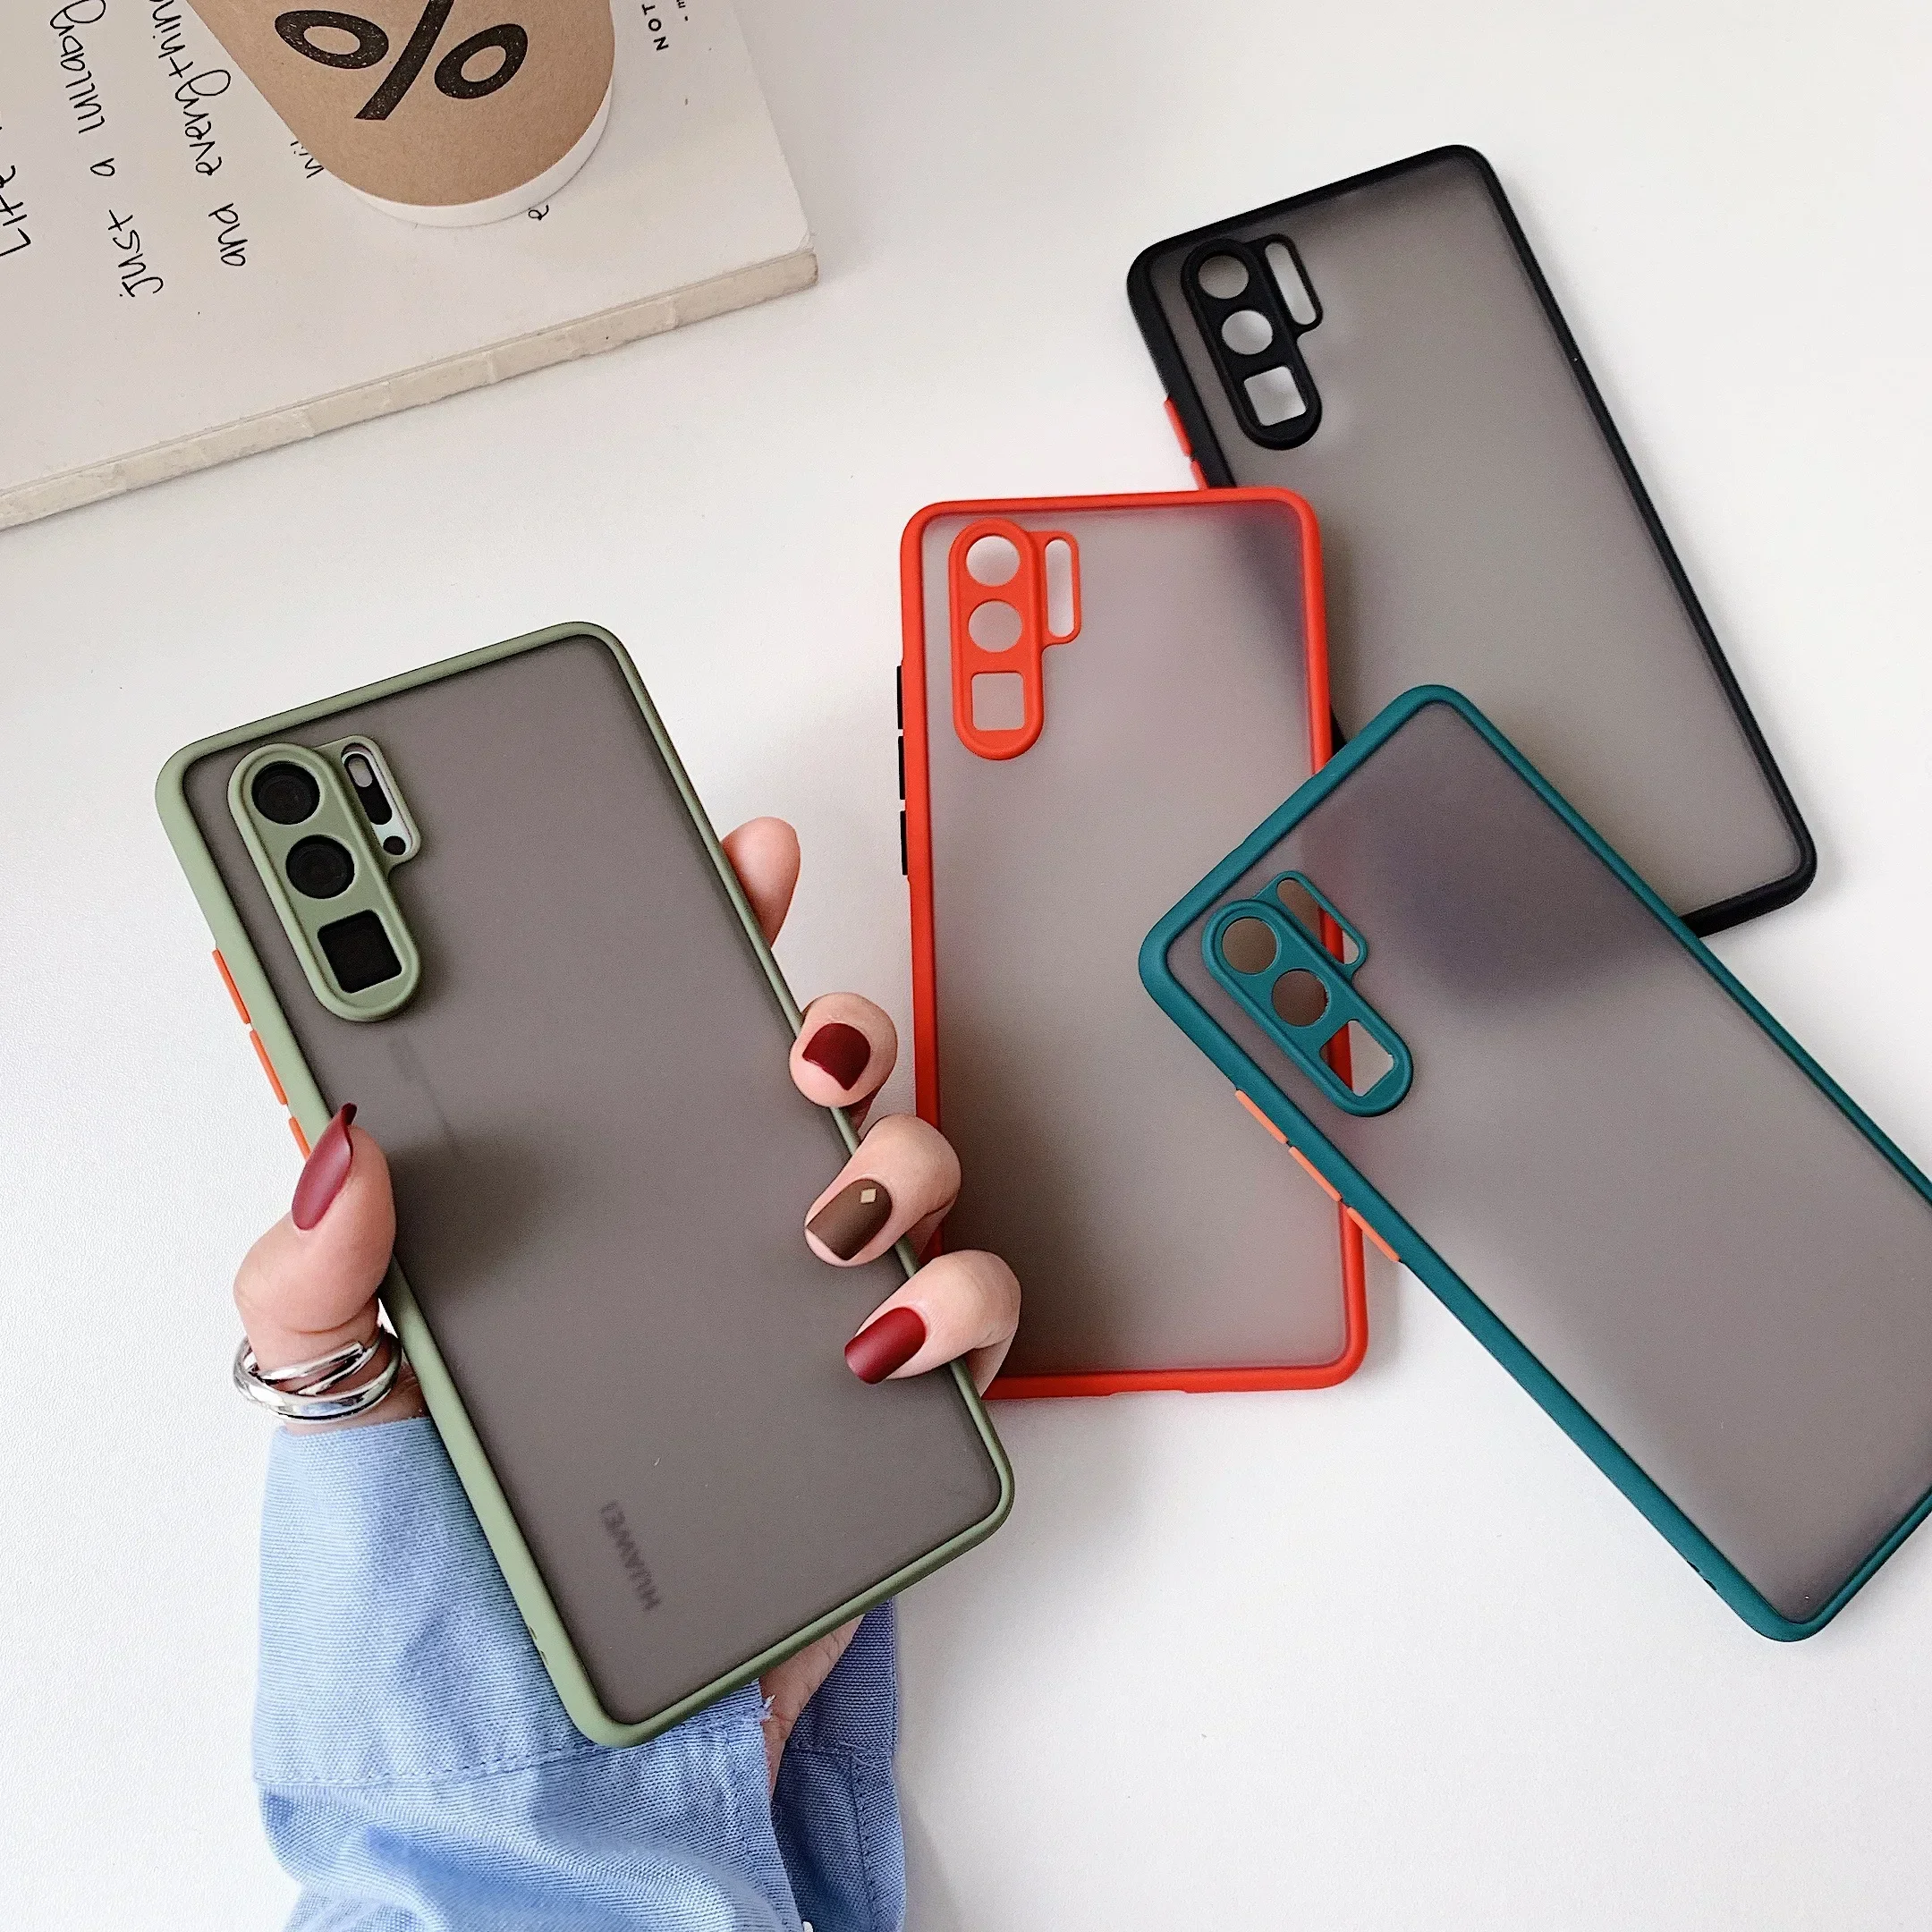 

Camera Lens Protection Phone Case For Huawei P20 P30 P40 Mate 20 Pro Honor 20 Matte Translucent Shockproof Back Cover Case